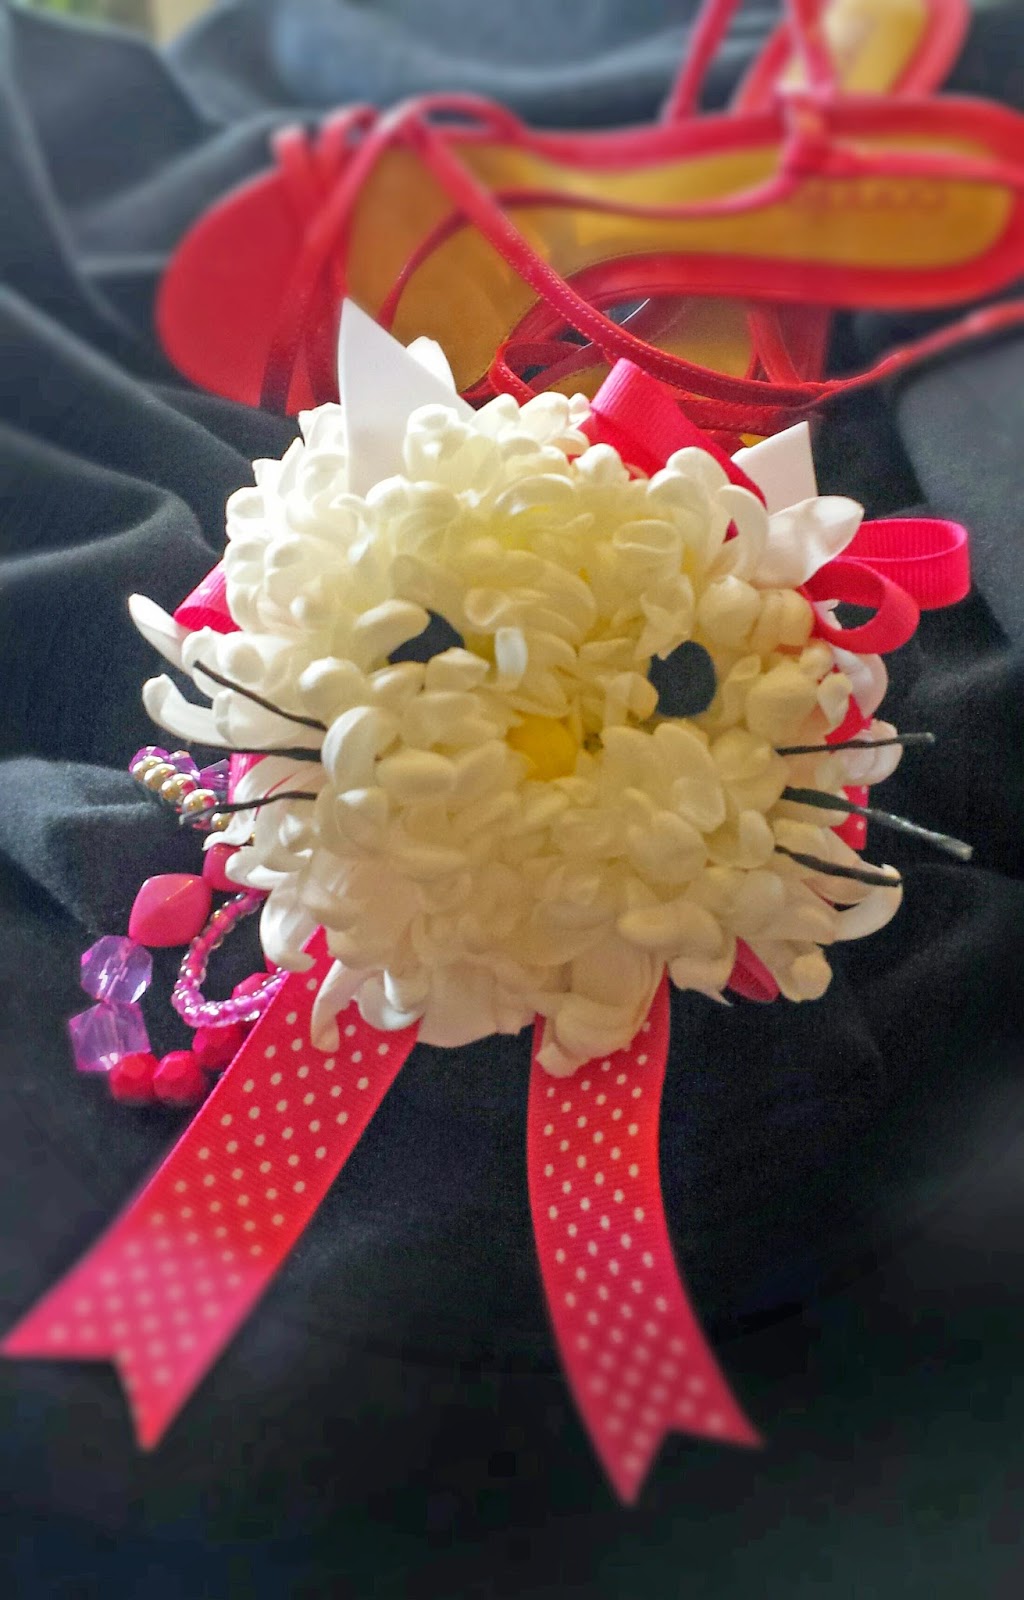 Hello Kitty Goes to Prom!